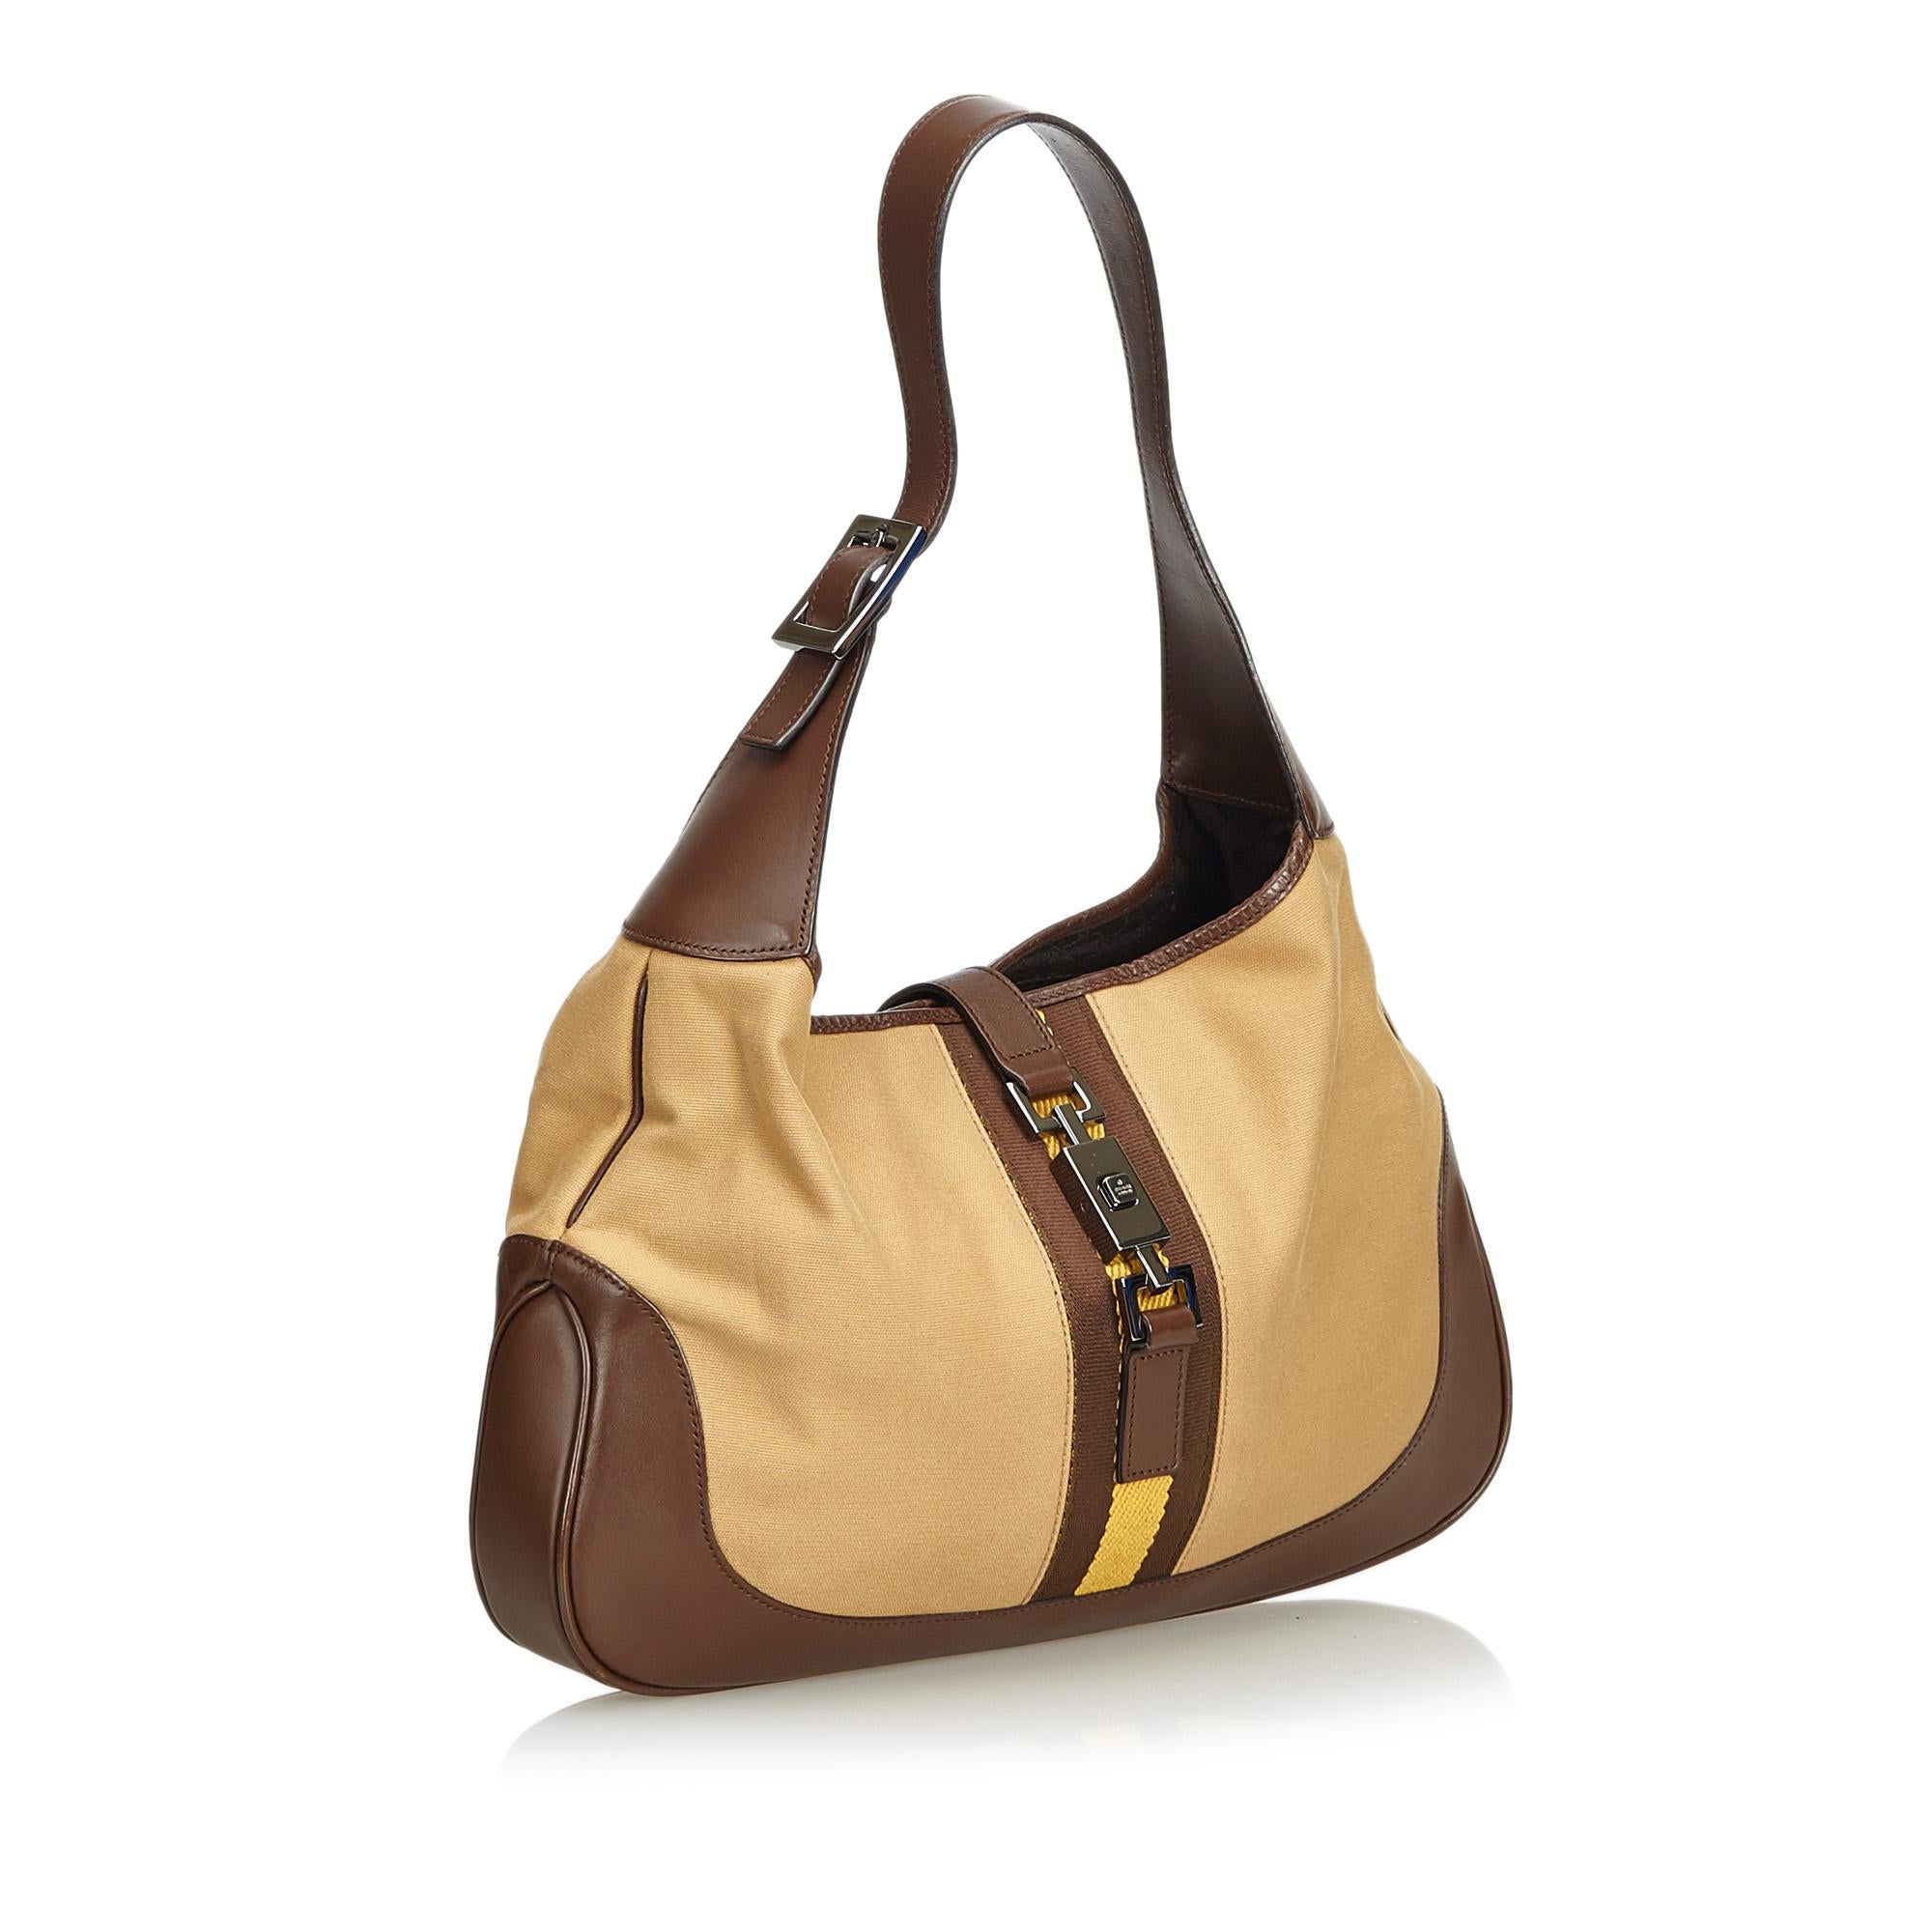 The Jackie shoulder bag features a canvas body with leather trim, a flat leather strap, open top with flat strap and push lock closure, and interior zip pocket. It carries as AB condition rating.

Inclusions: 
Dust Bag

Dimensions:
Length: 21.00